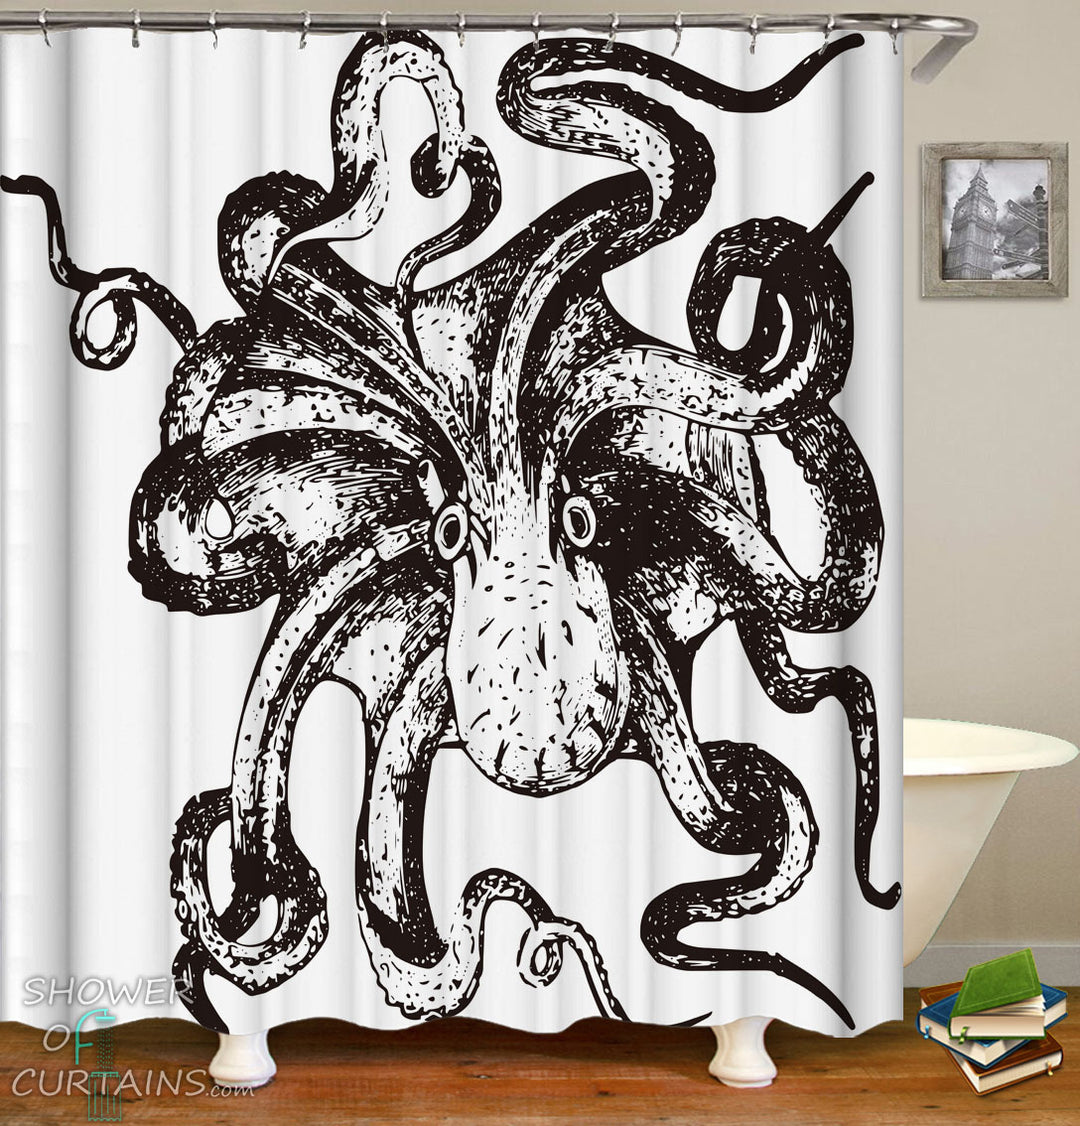 Black And White Shower Curtains of Kraken Octopus Drawing